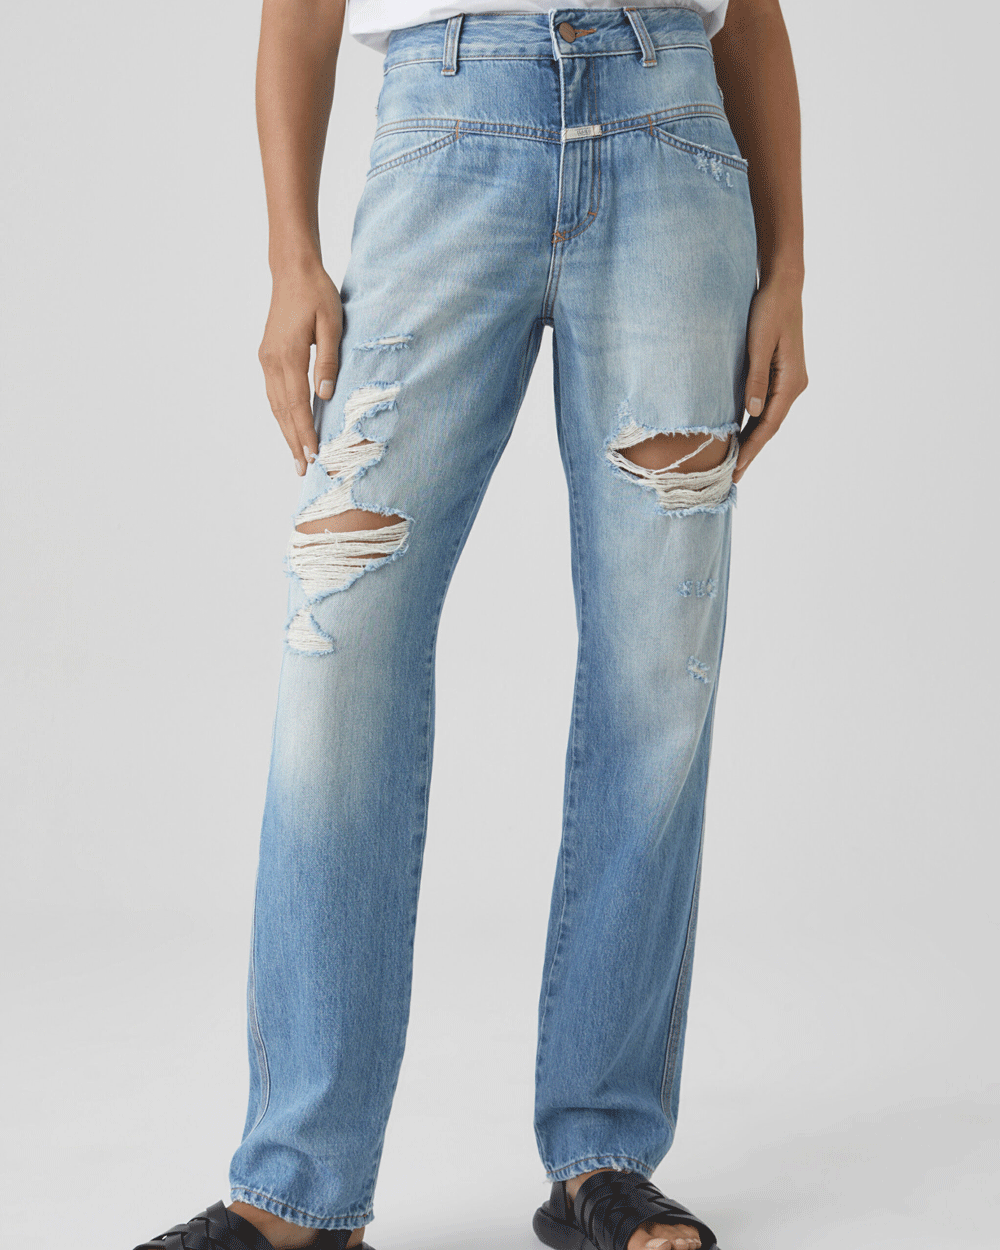 X-Pose High Rise Relaxed Jean in Light Blue